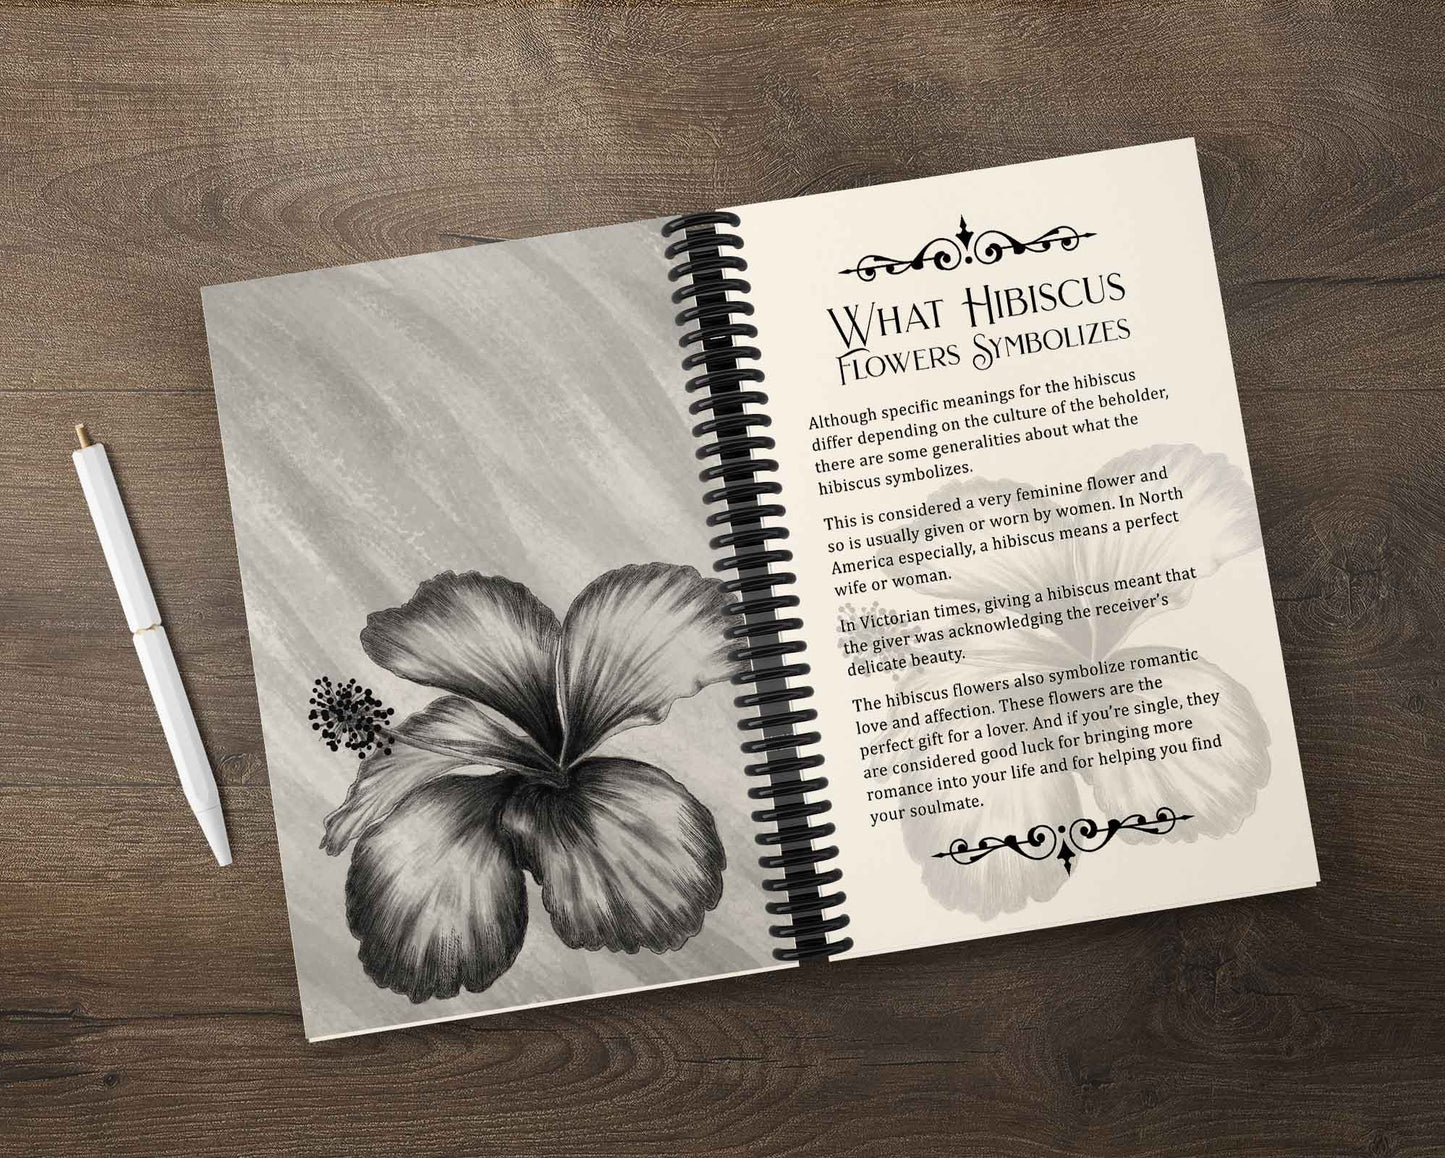 A Look Inside The Hibiscus Flowers Daily Life Journal 2